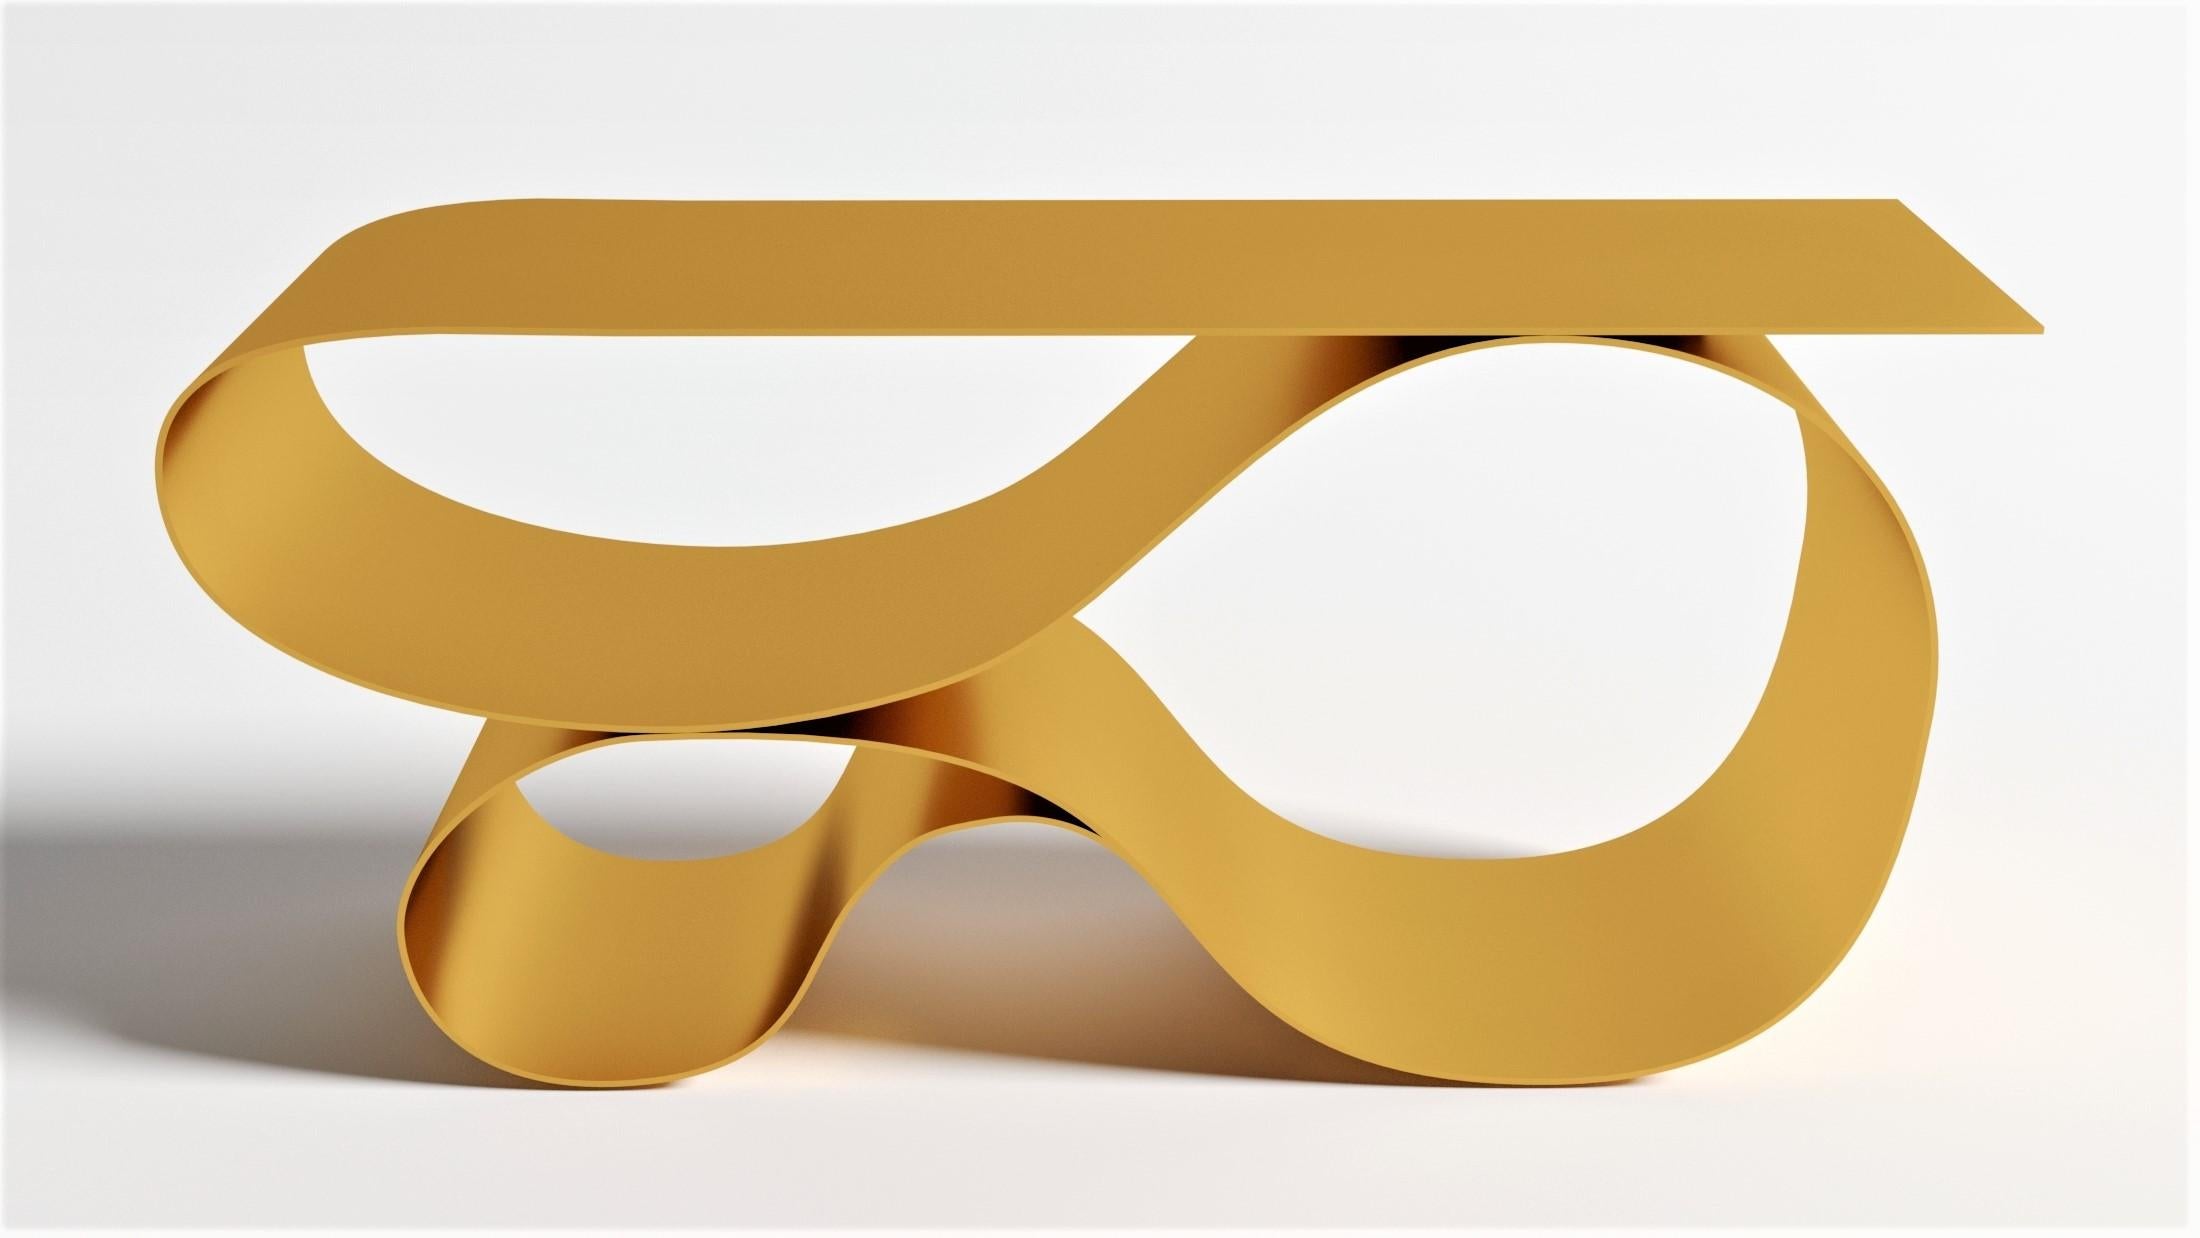 Whorl console in gold powder coated aluminum by Neal Aronowitz Design
Dimensions: D 43.2 x W 160 x H 76.2 cm
Materials: Powder coated aluminium.
Size, colors and finish can be modified and customized.

An elegant and powerful sculptural